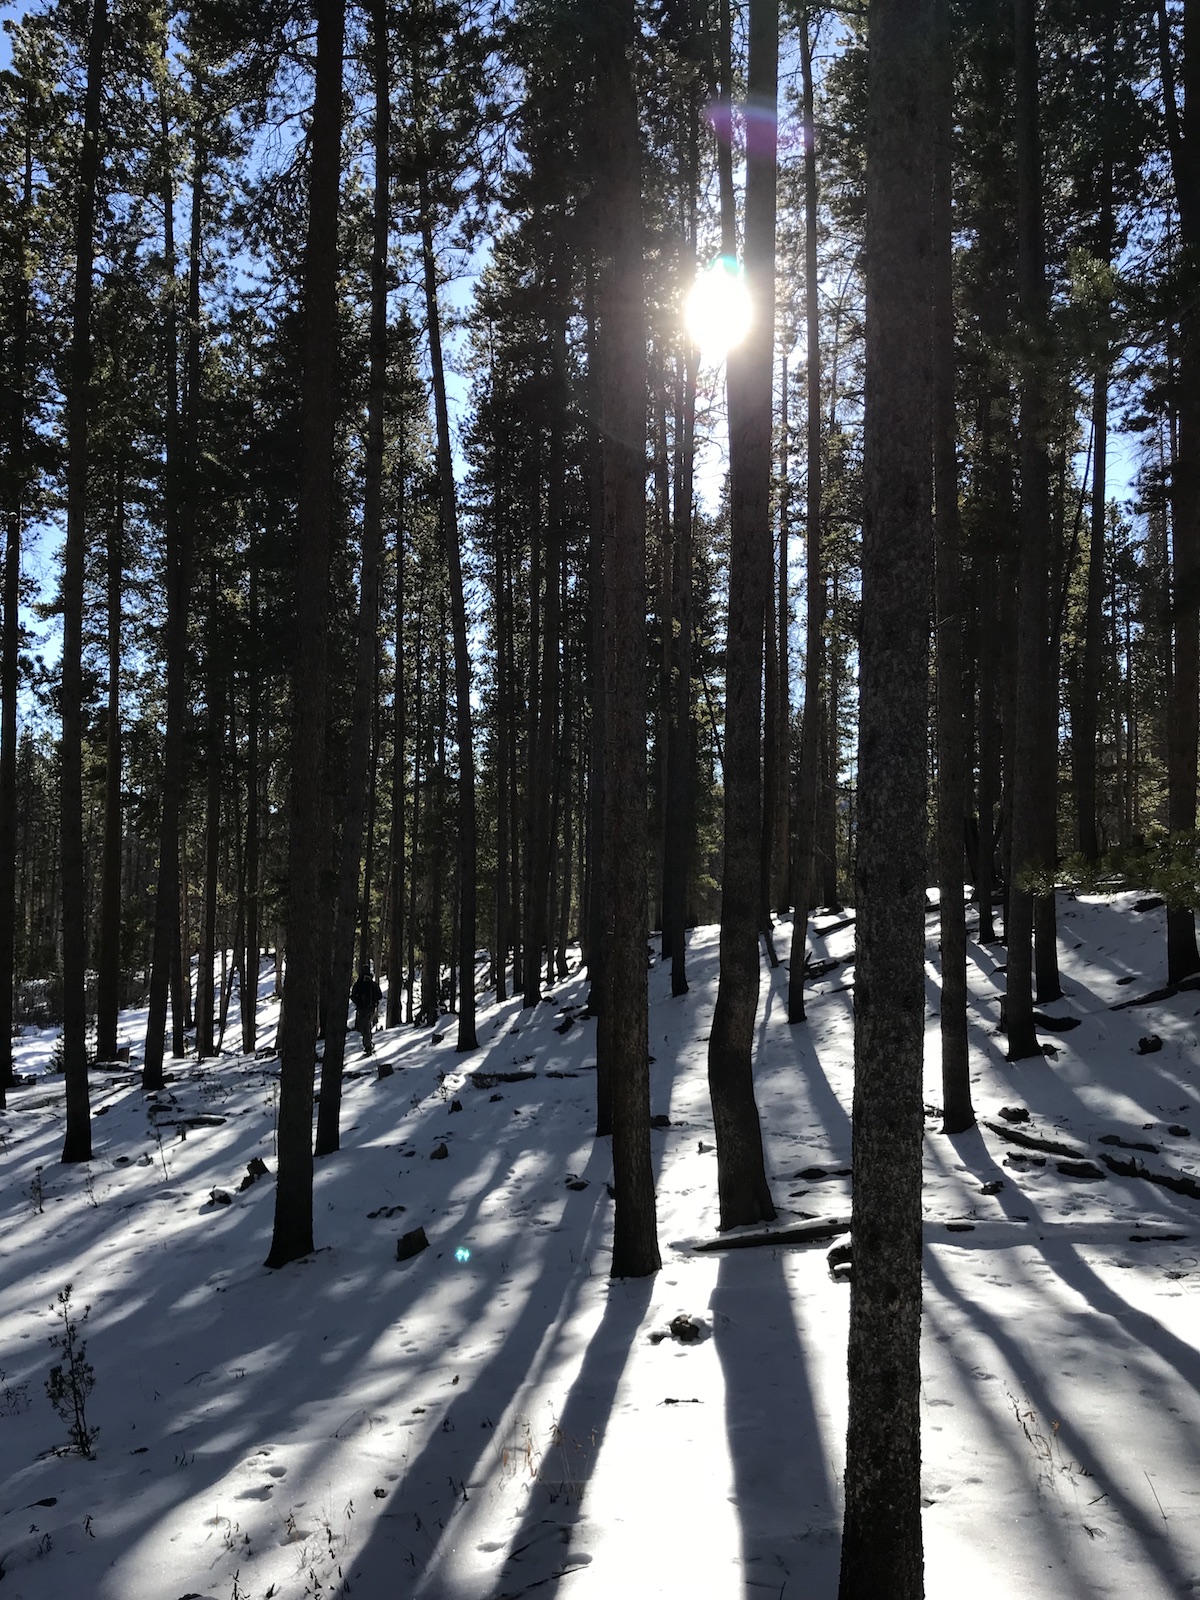 Lodgepole pines in the Medicine Bow National Forest in the Snow Range, Wyoming. [Photo] Katherine Indermaur